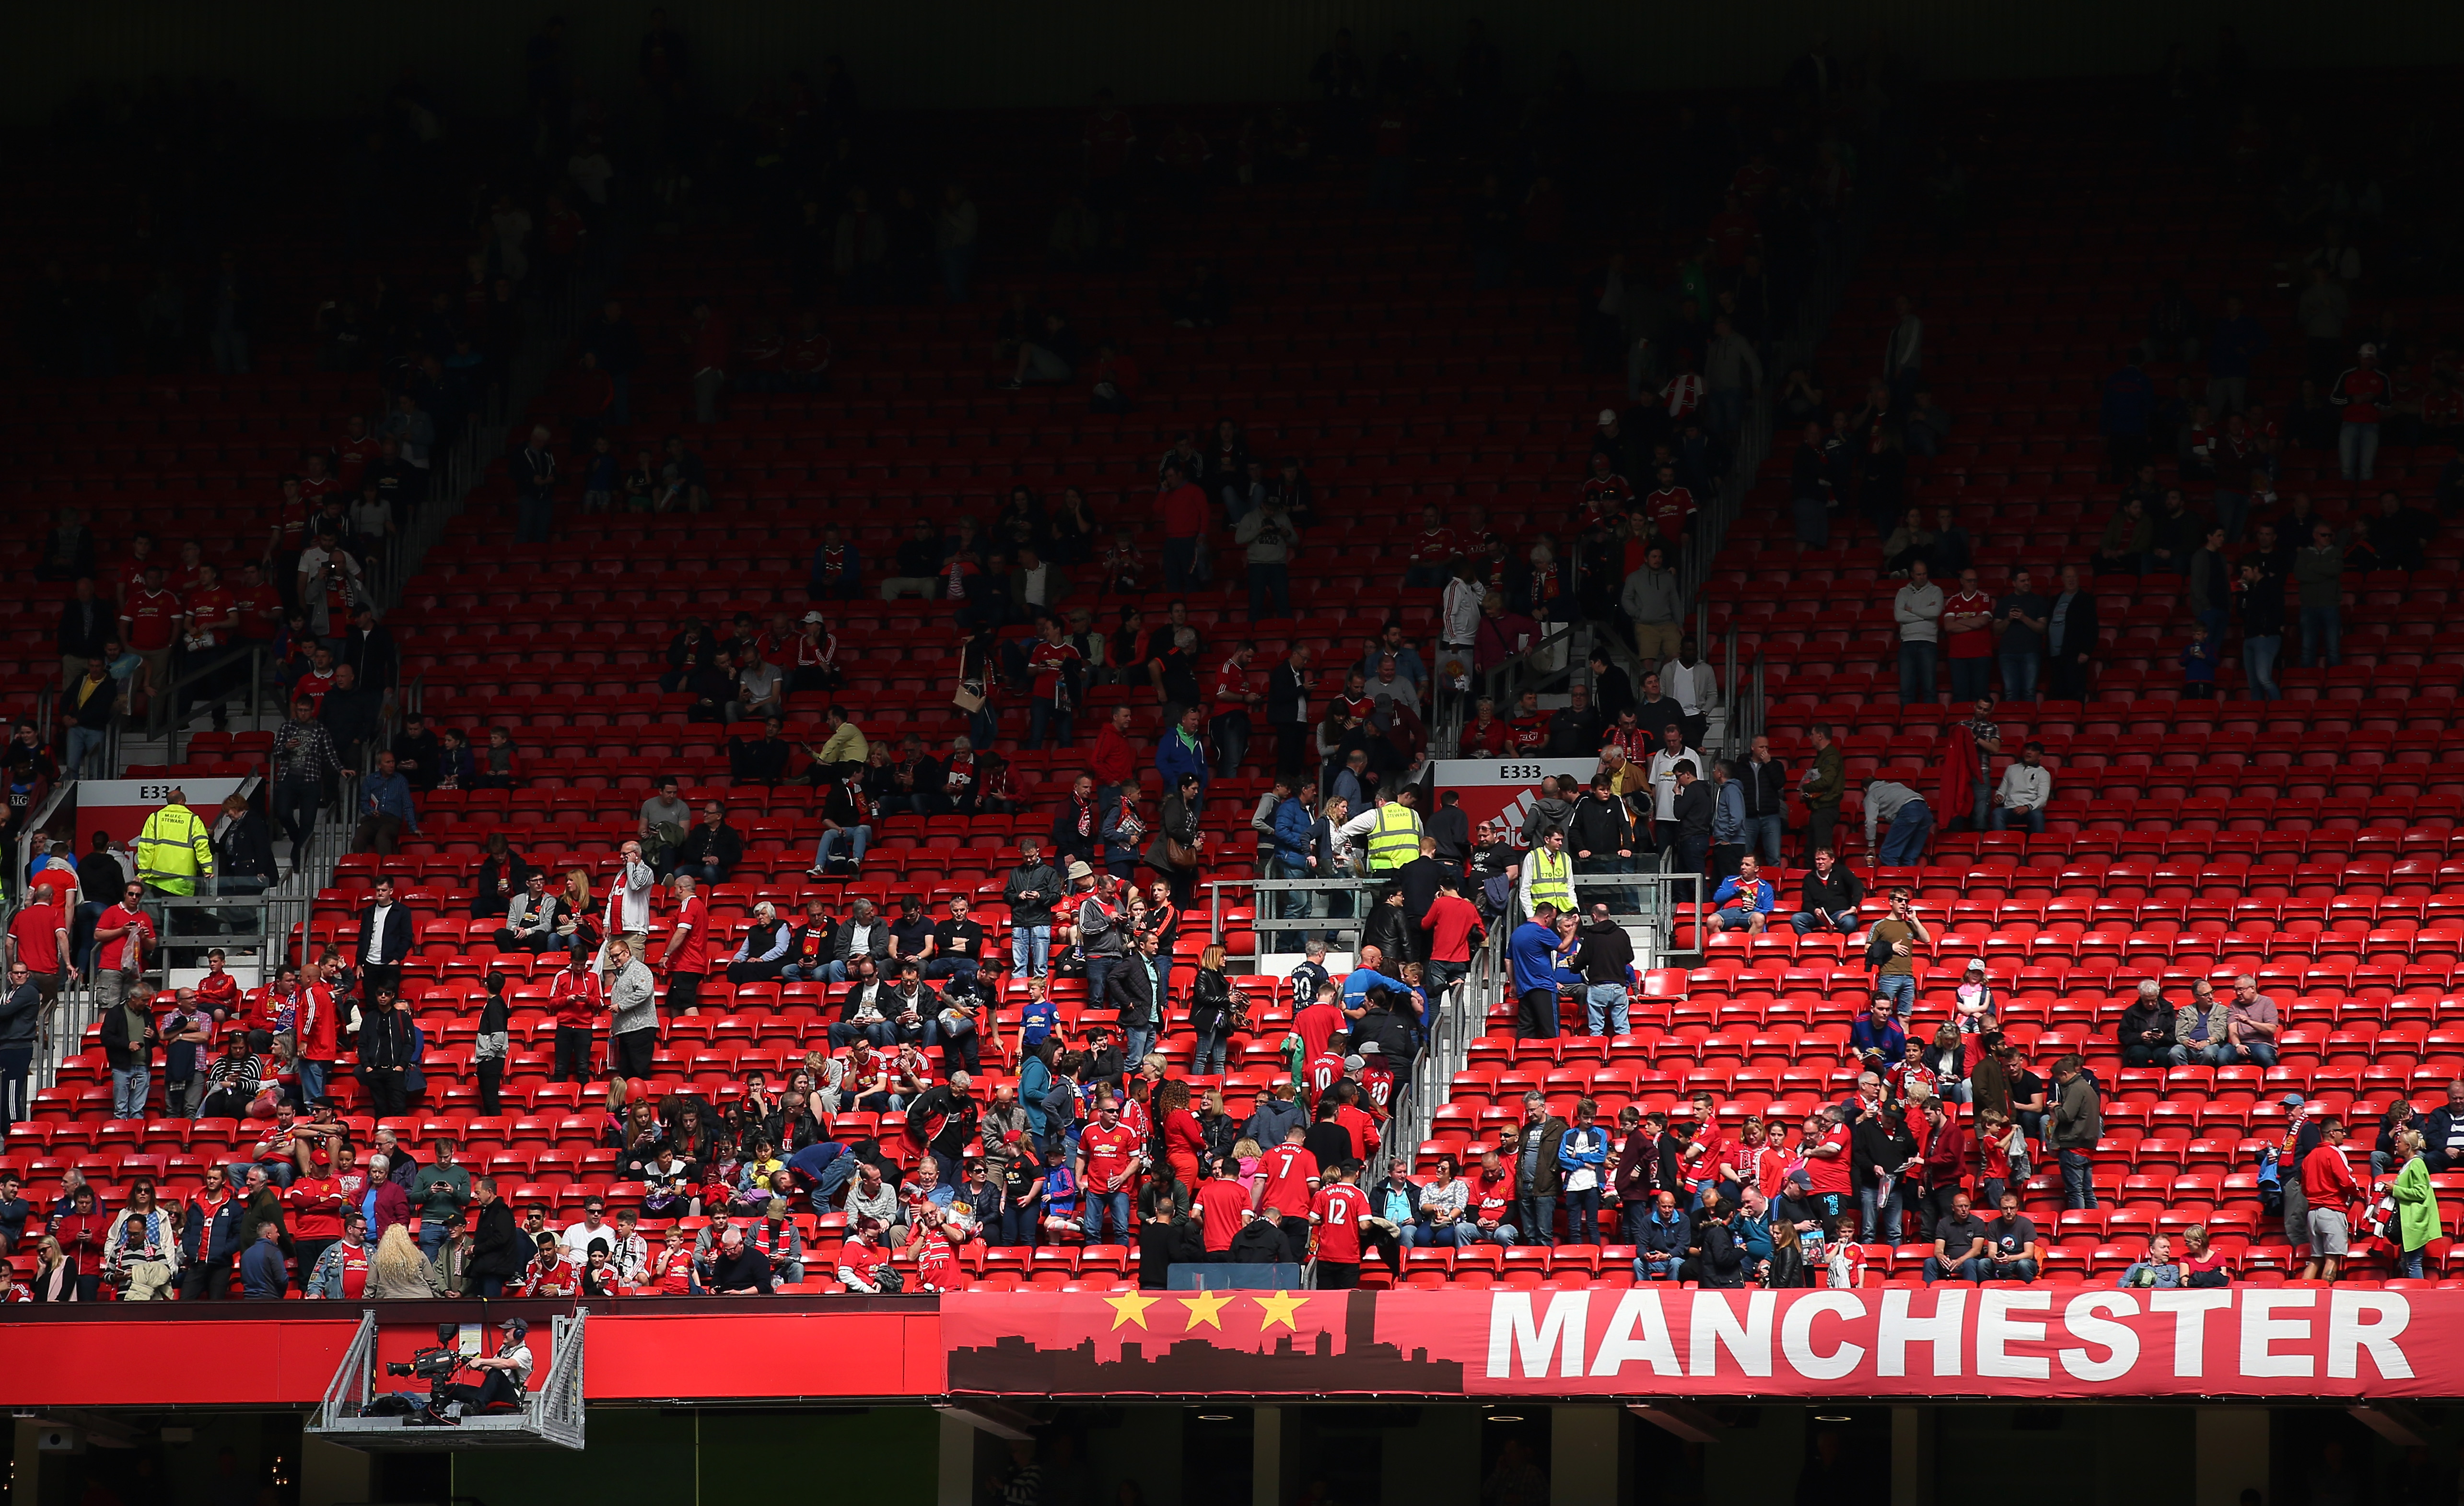 Fans are evacuated from the ground as the match is abandoned ahead of the Barclays Premier League match between Manchester United and AFC Bournemouth at Old Trafford on May 15, 2016 in Manchester, England. (Getty)